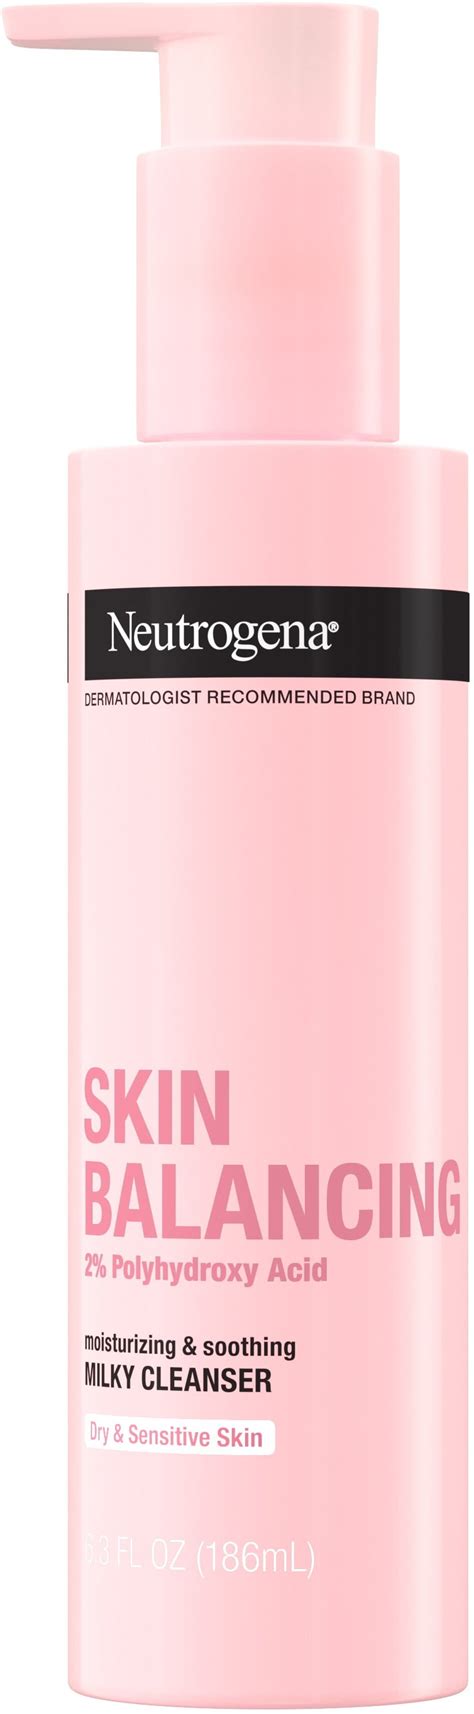 Neutrogena Skin Balancing Milky Cleanser With 2 Polyhydroxy Acid Pha Soothing And Moisturizing